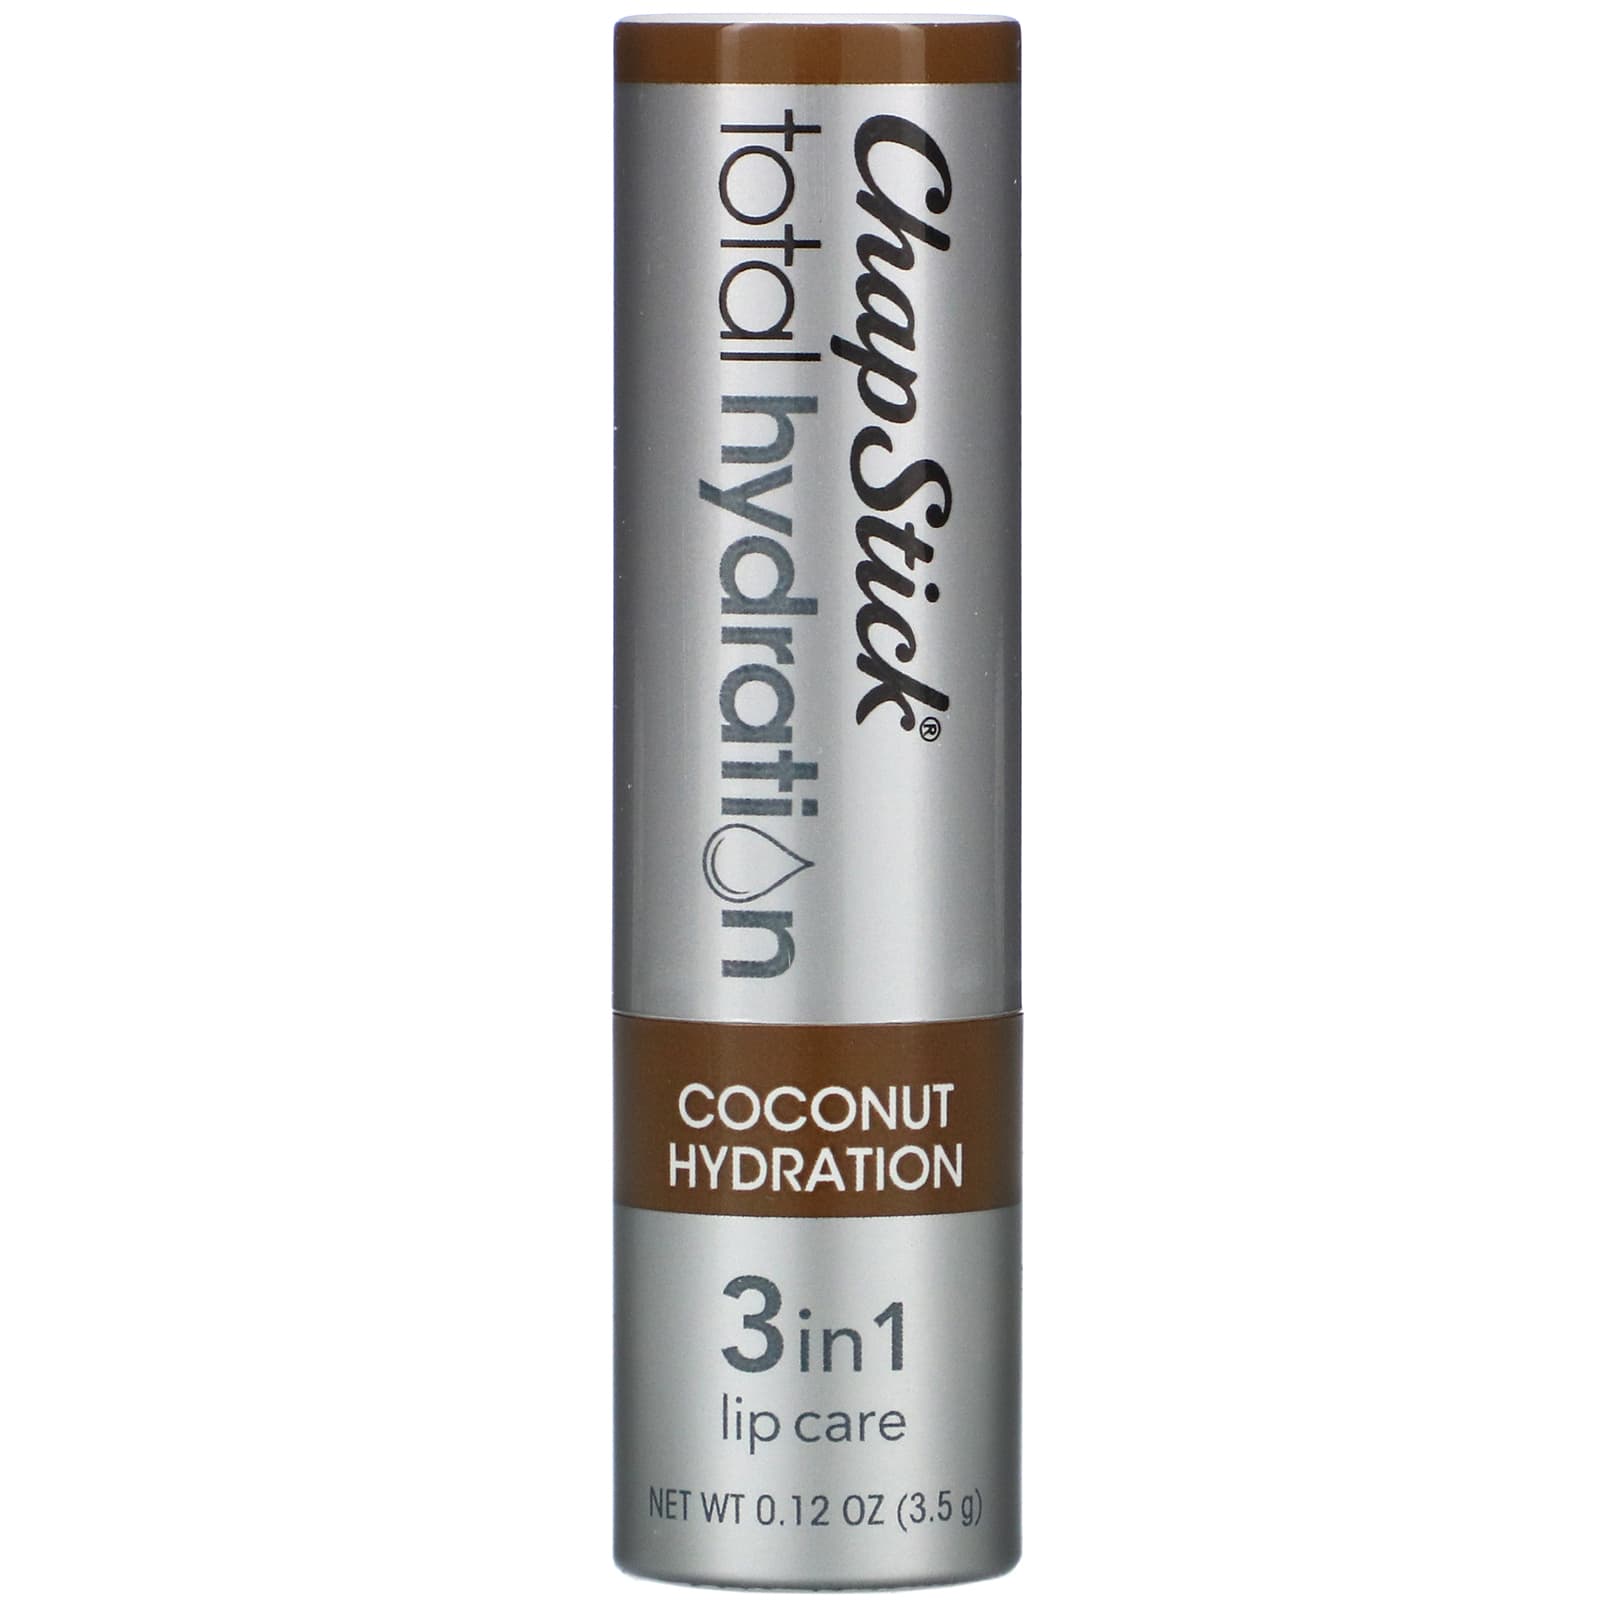 Chapstick, Total Hydration, 3 in 1 Lip Care, Coconut Hydration